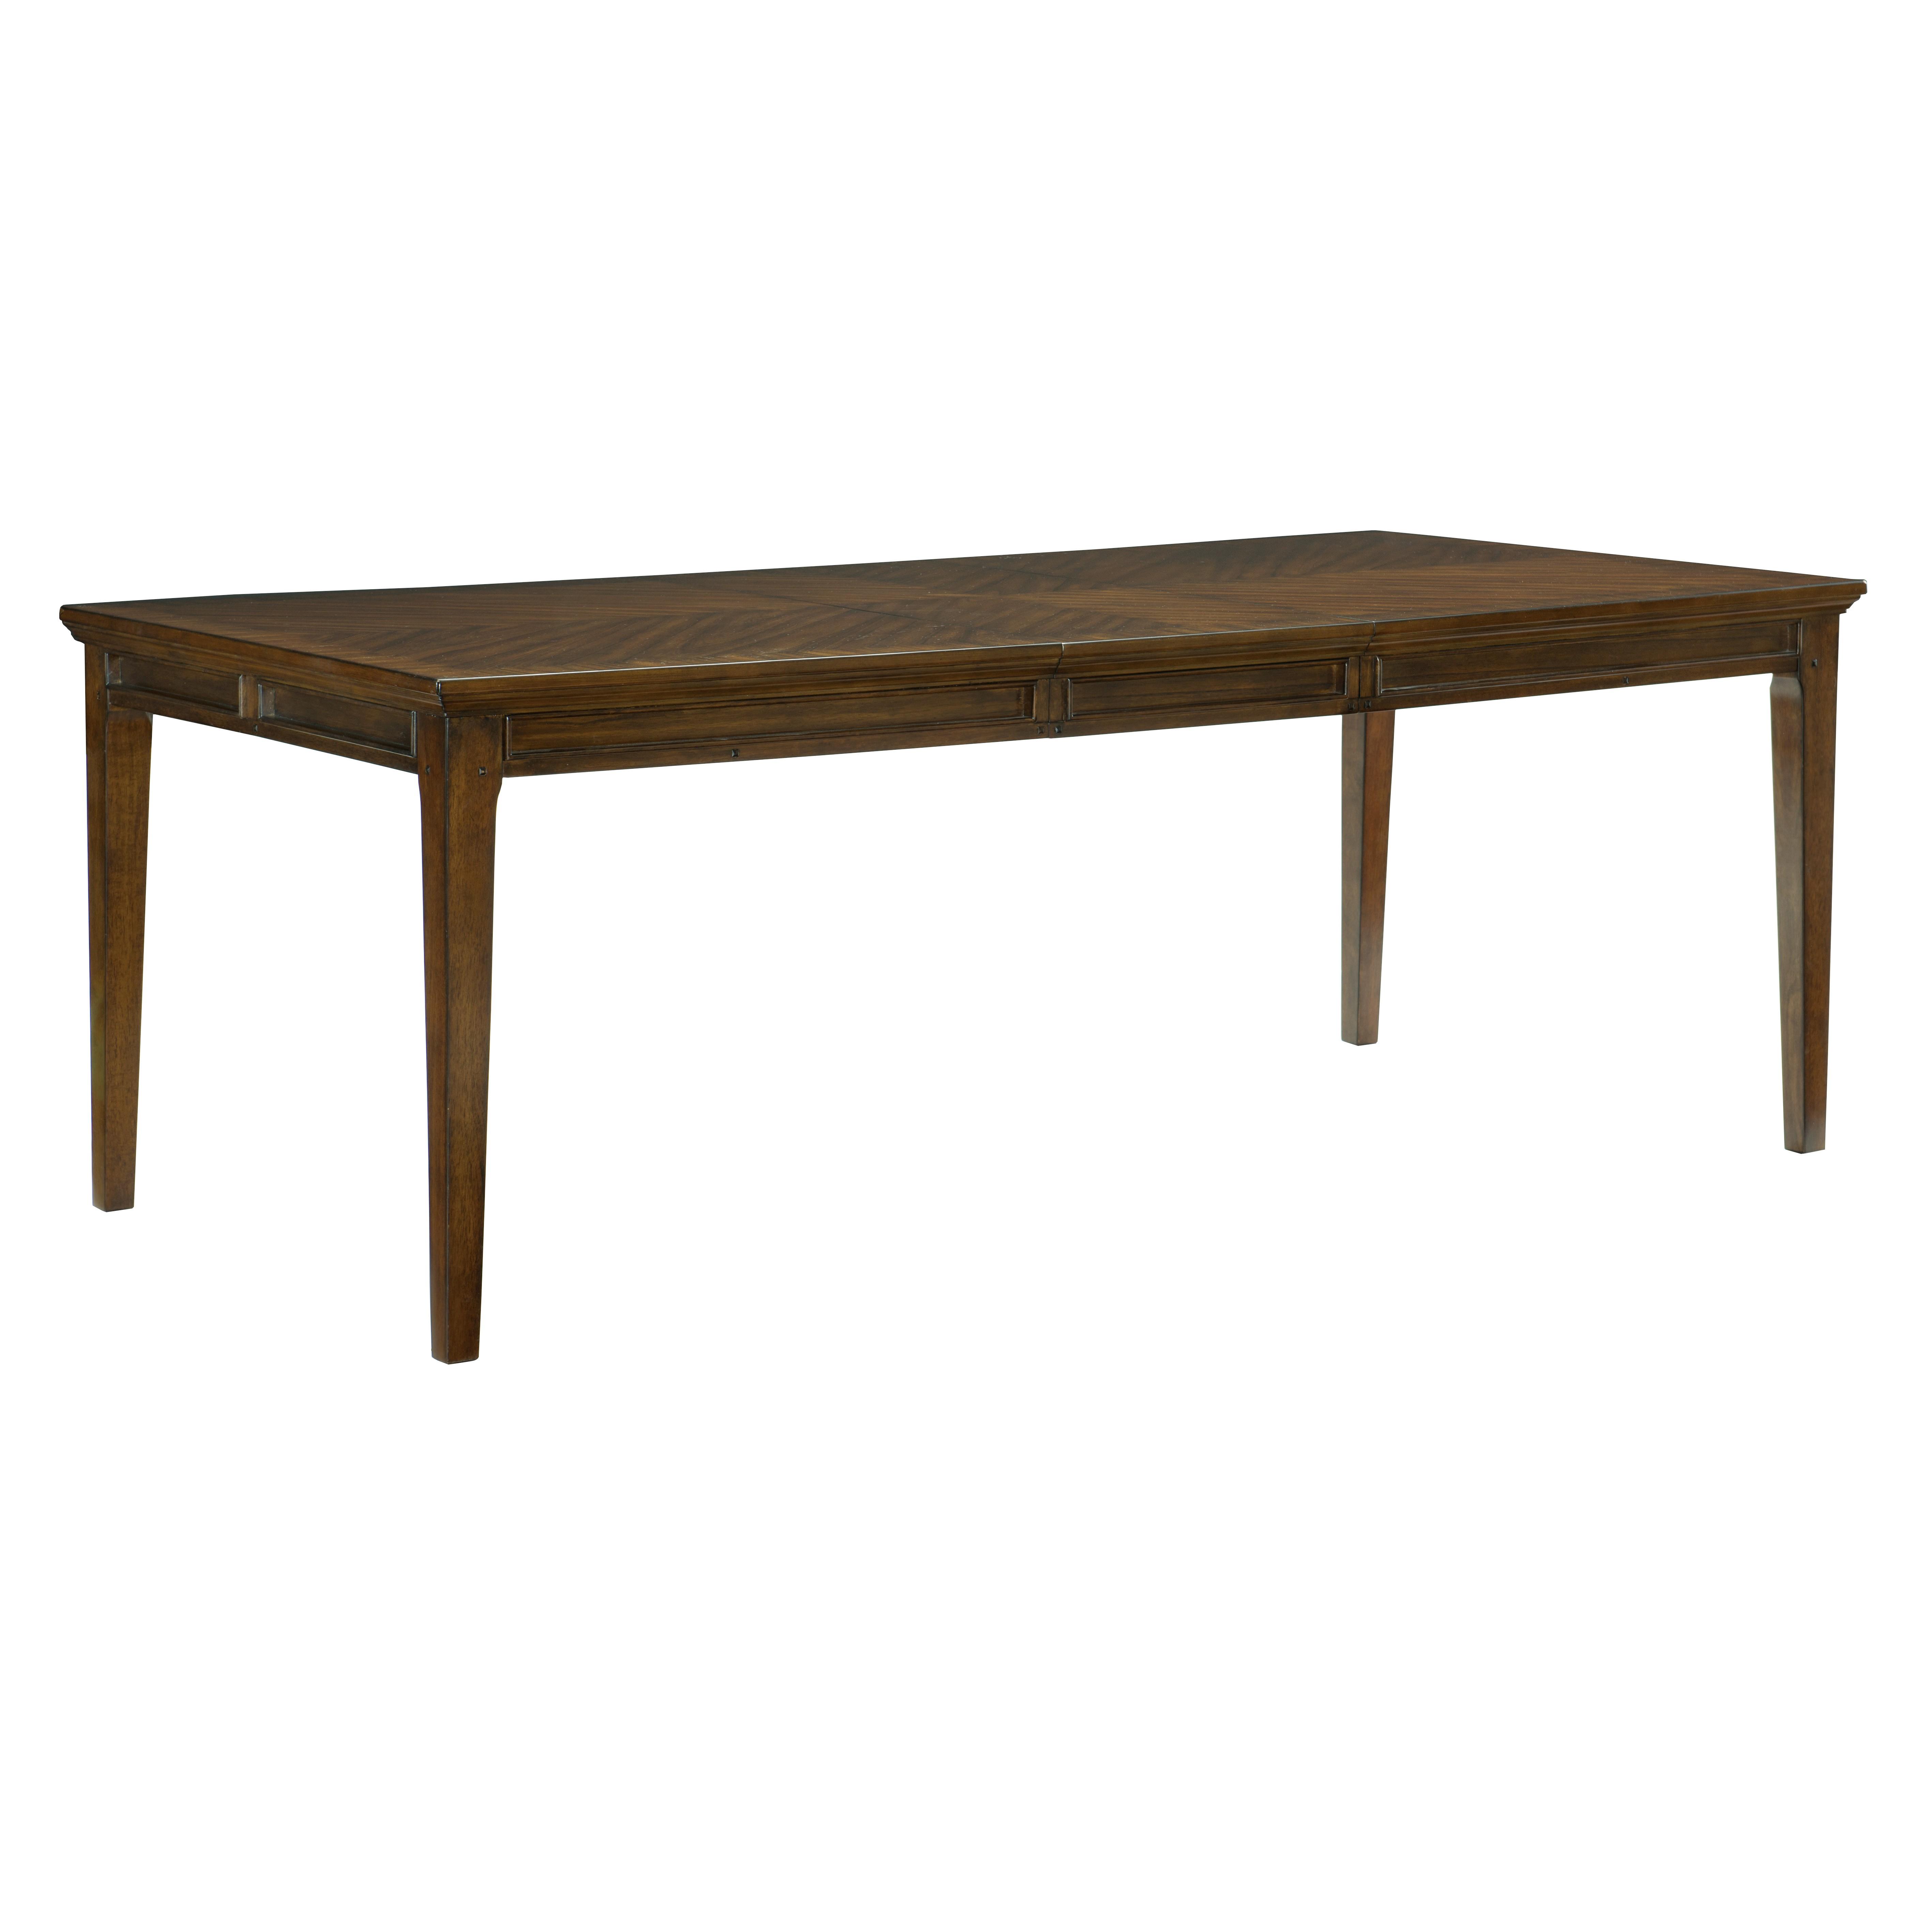 Traditional Dining Table 1649-82 Frazier Park 1649-82 in Cherry 